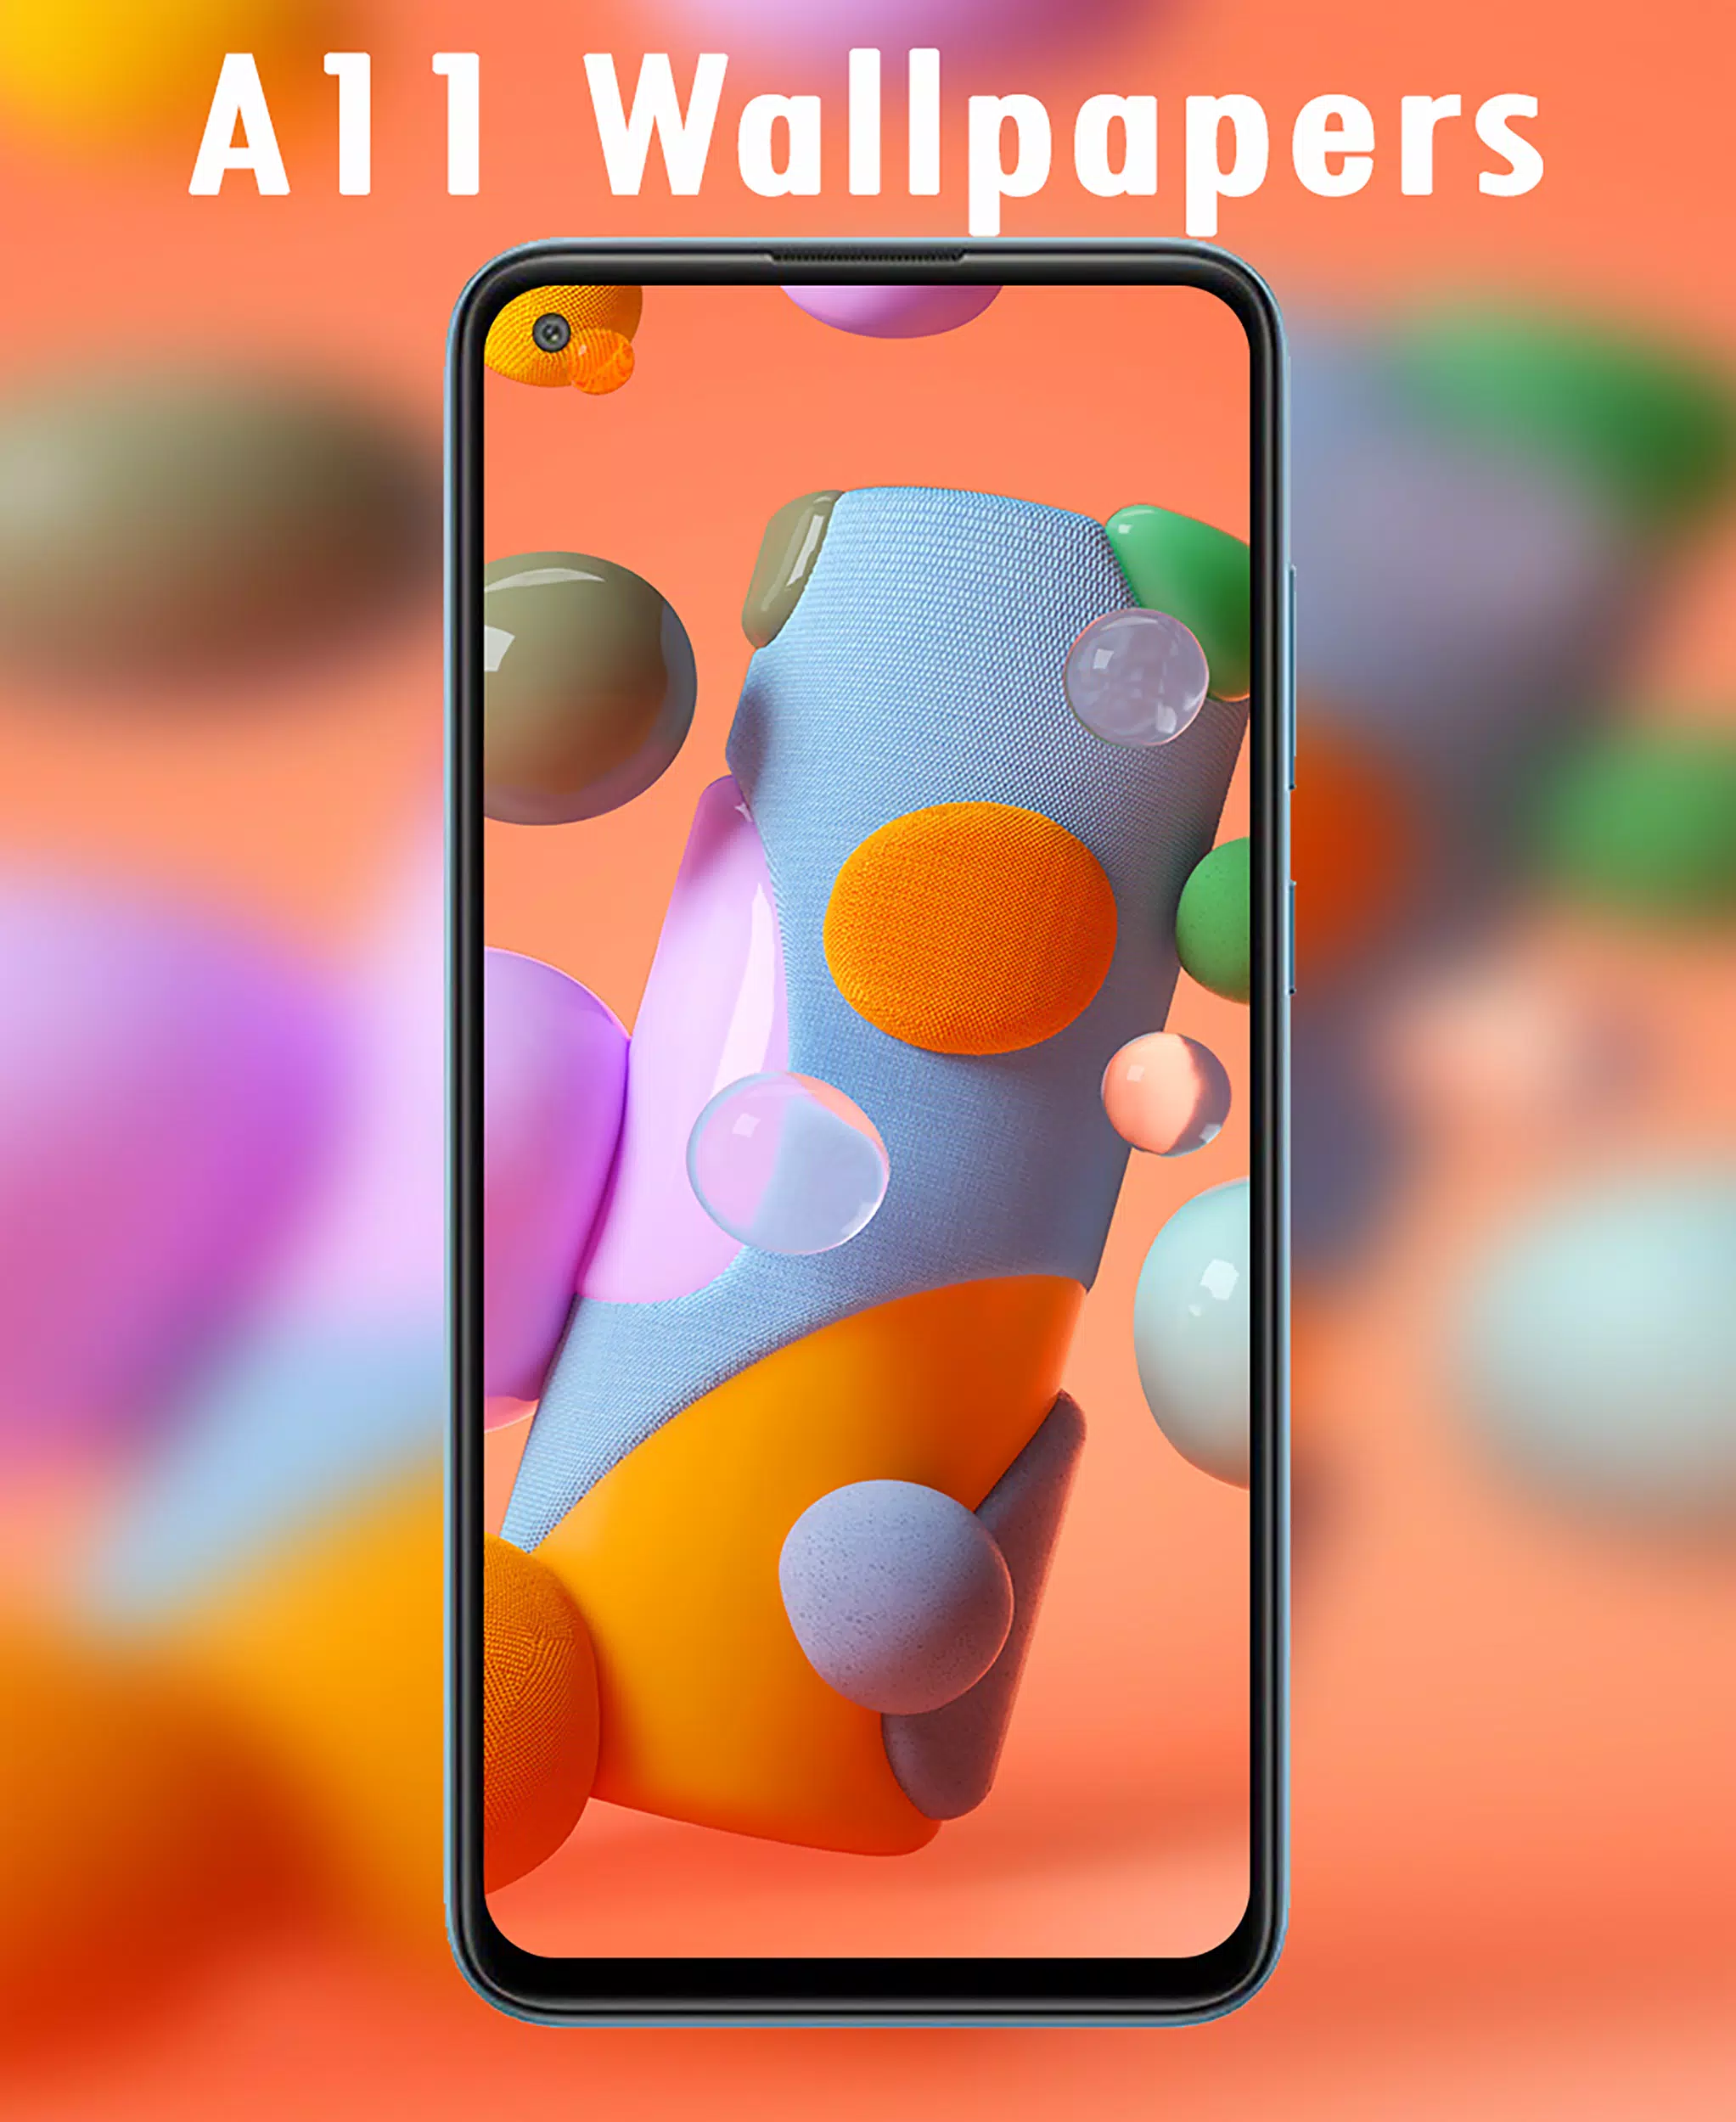 Translation: Samsung A11 Wallpaper: Update unique and beautiful wallpapers for your Samsung A11 to show your own style and personality. Click on the image to find the most beautiful wallpaper styles for Samsung A11 users.